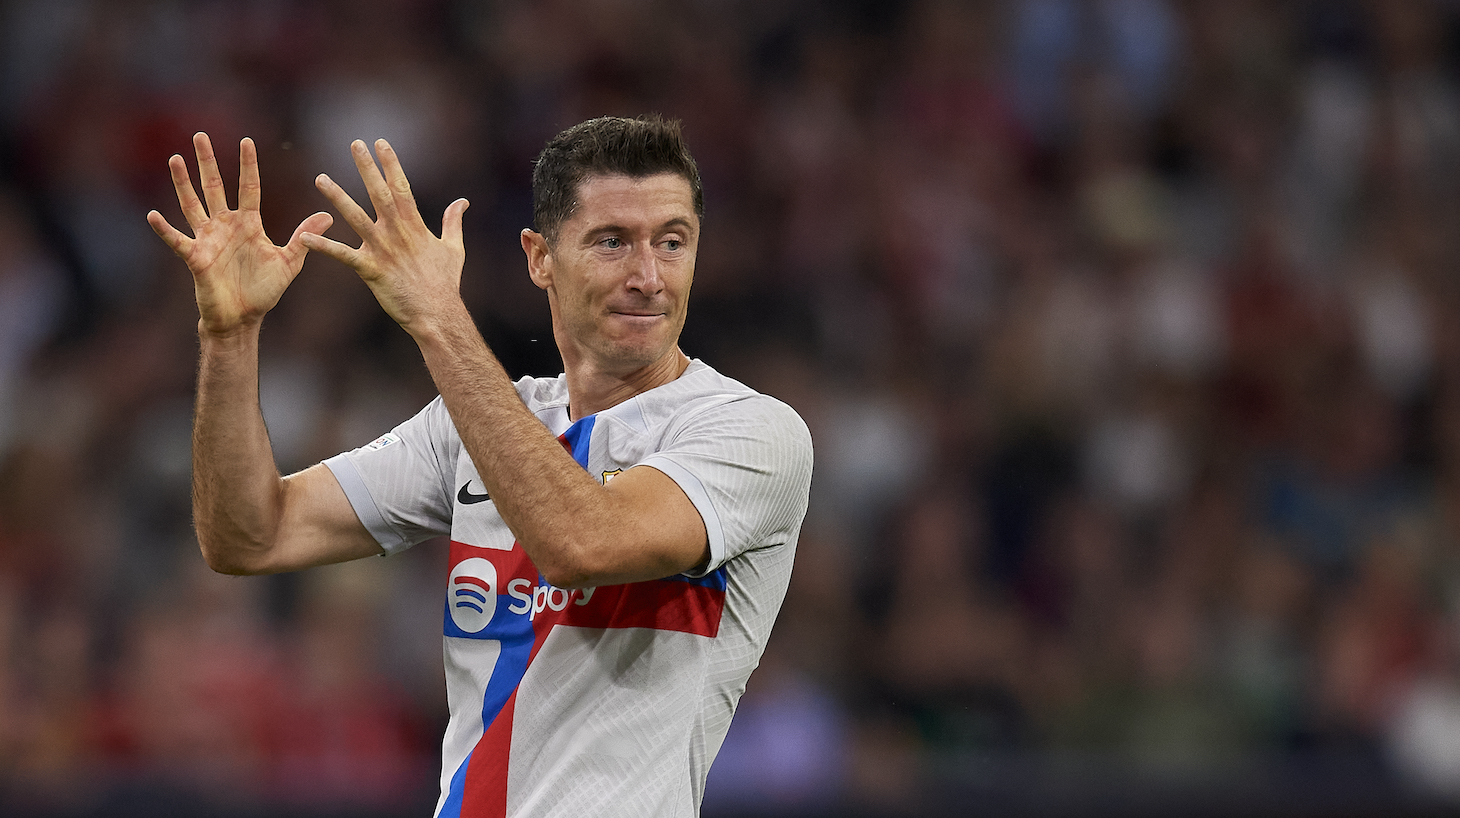 Robert Lewandowski centre-forward of Barcelona and Poland lament a failed occasion during the UEFA Champions League group C match between FC Bayern München and FC Barcelona at Allianz Arena on September 13, 2022 in Munich, Germany.